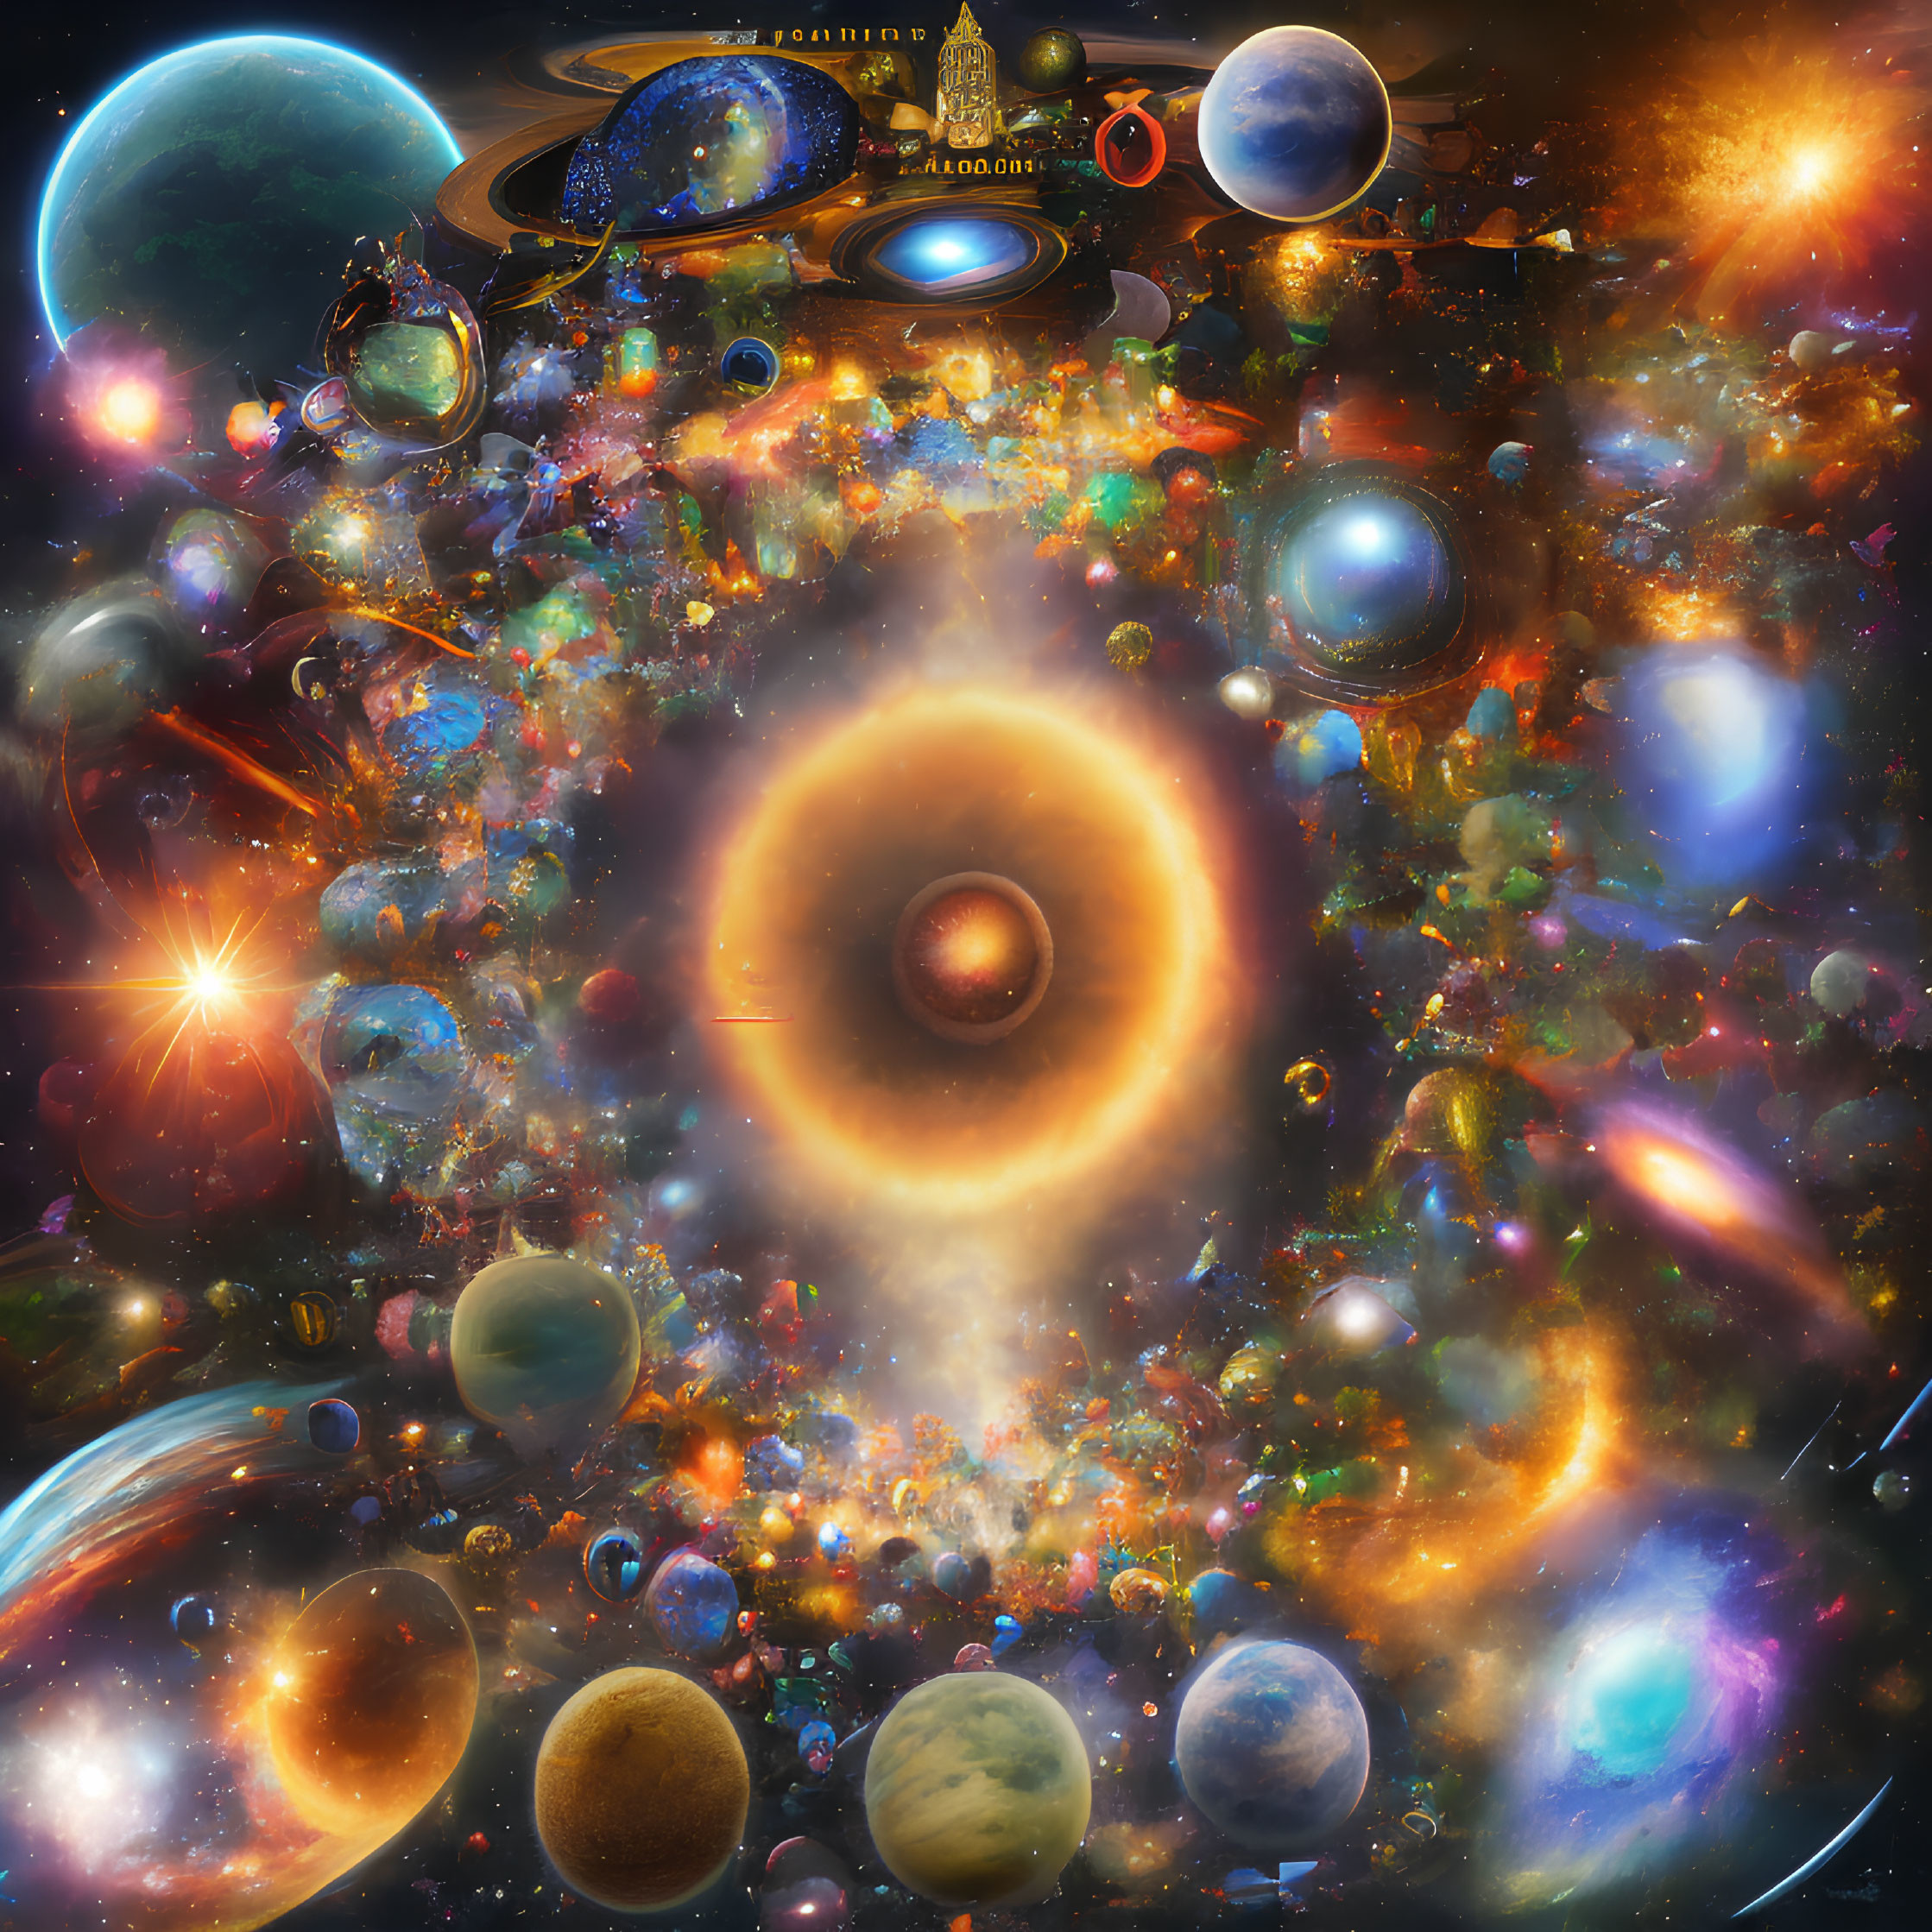 Colorful Cosmic Collage of Planets, Stars, and Nebulae